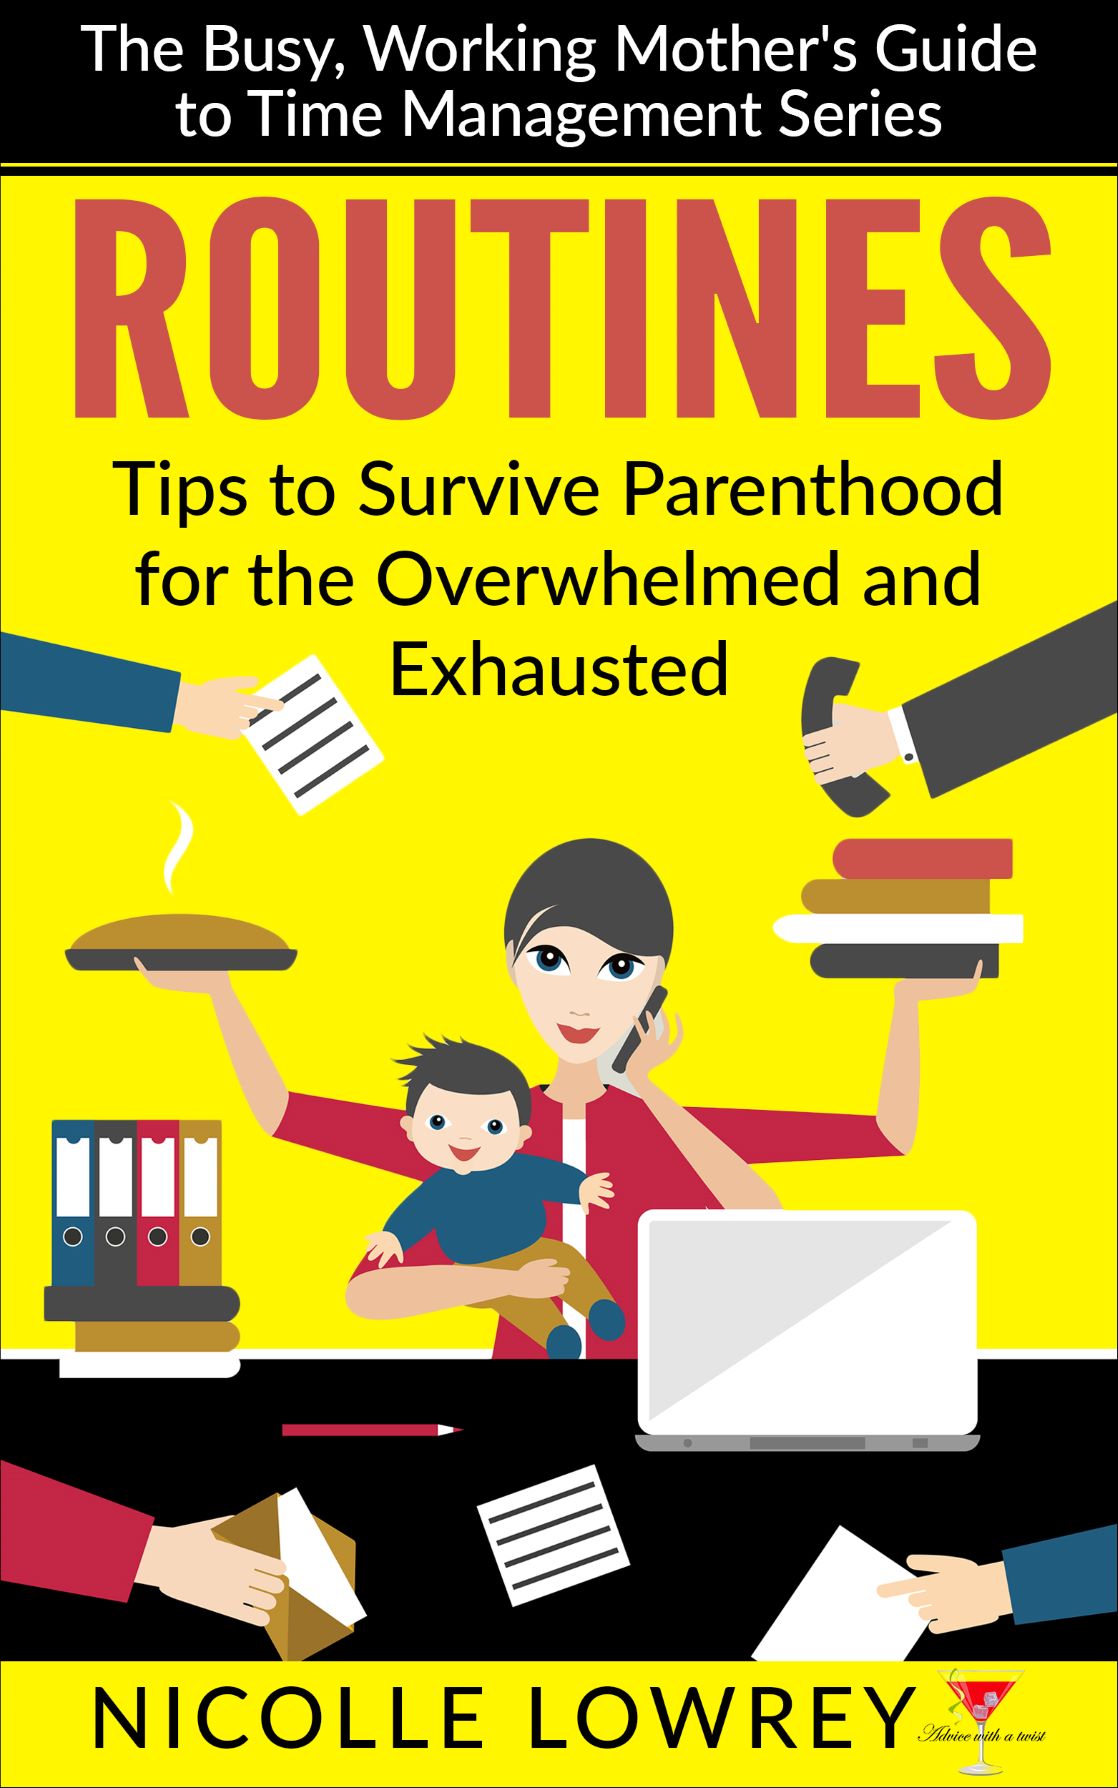 FREE: The Busy, Working Mother’s Guide to Time Management: Routines -Tips to Survive Parenthood for the Overwhelmed and Exhausted by Nicolle Lowrey